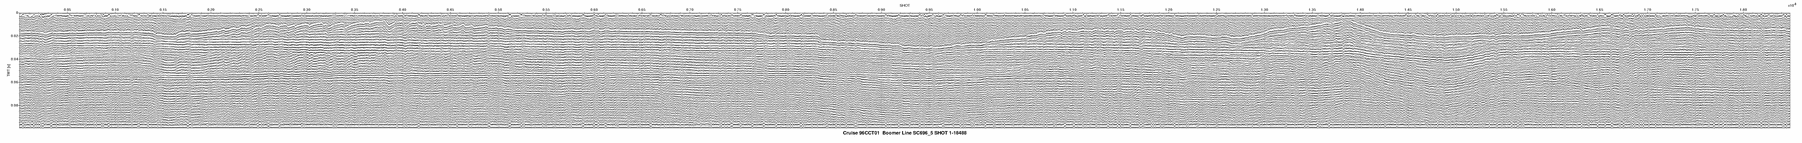 SC696_5 seismic profile thumbnail image with link to full size image